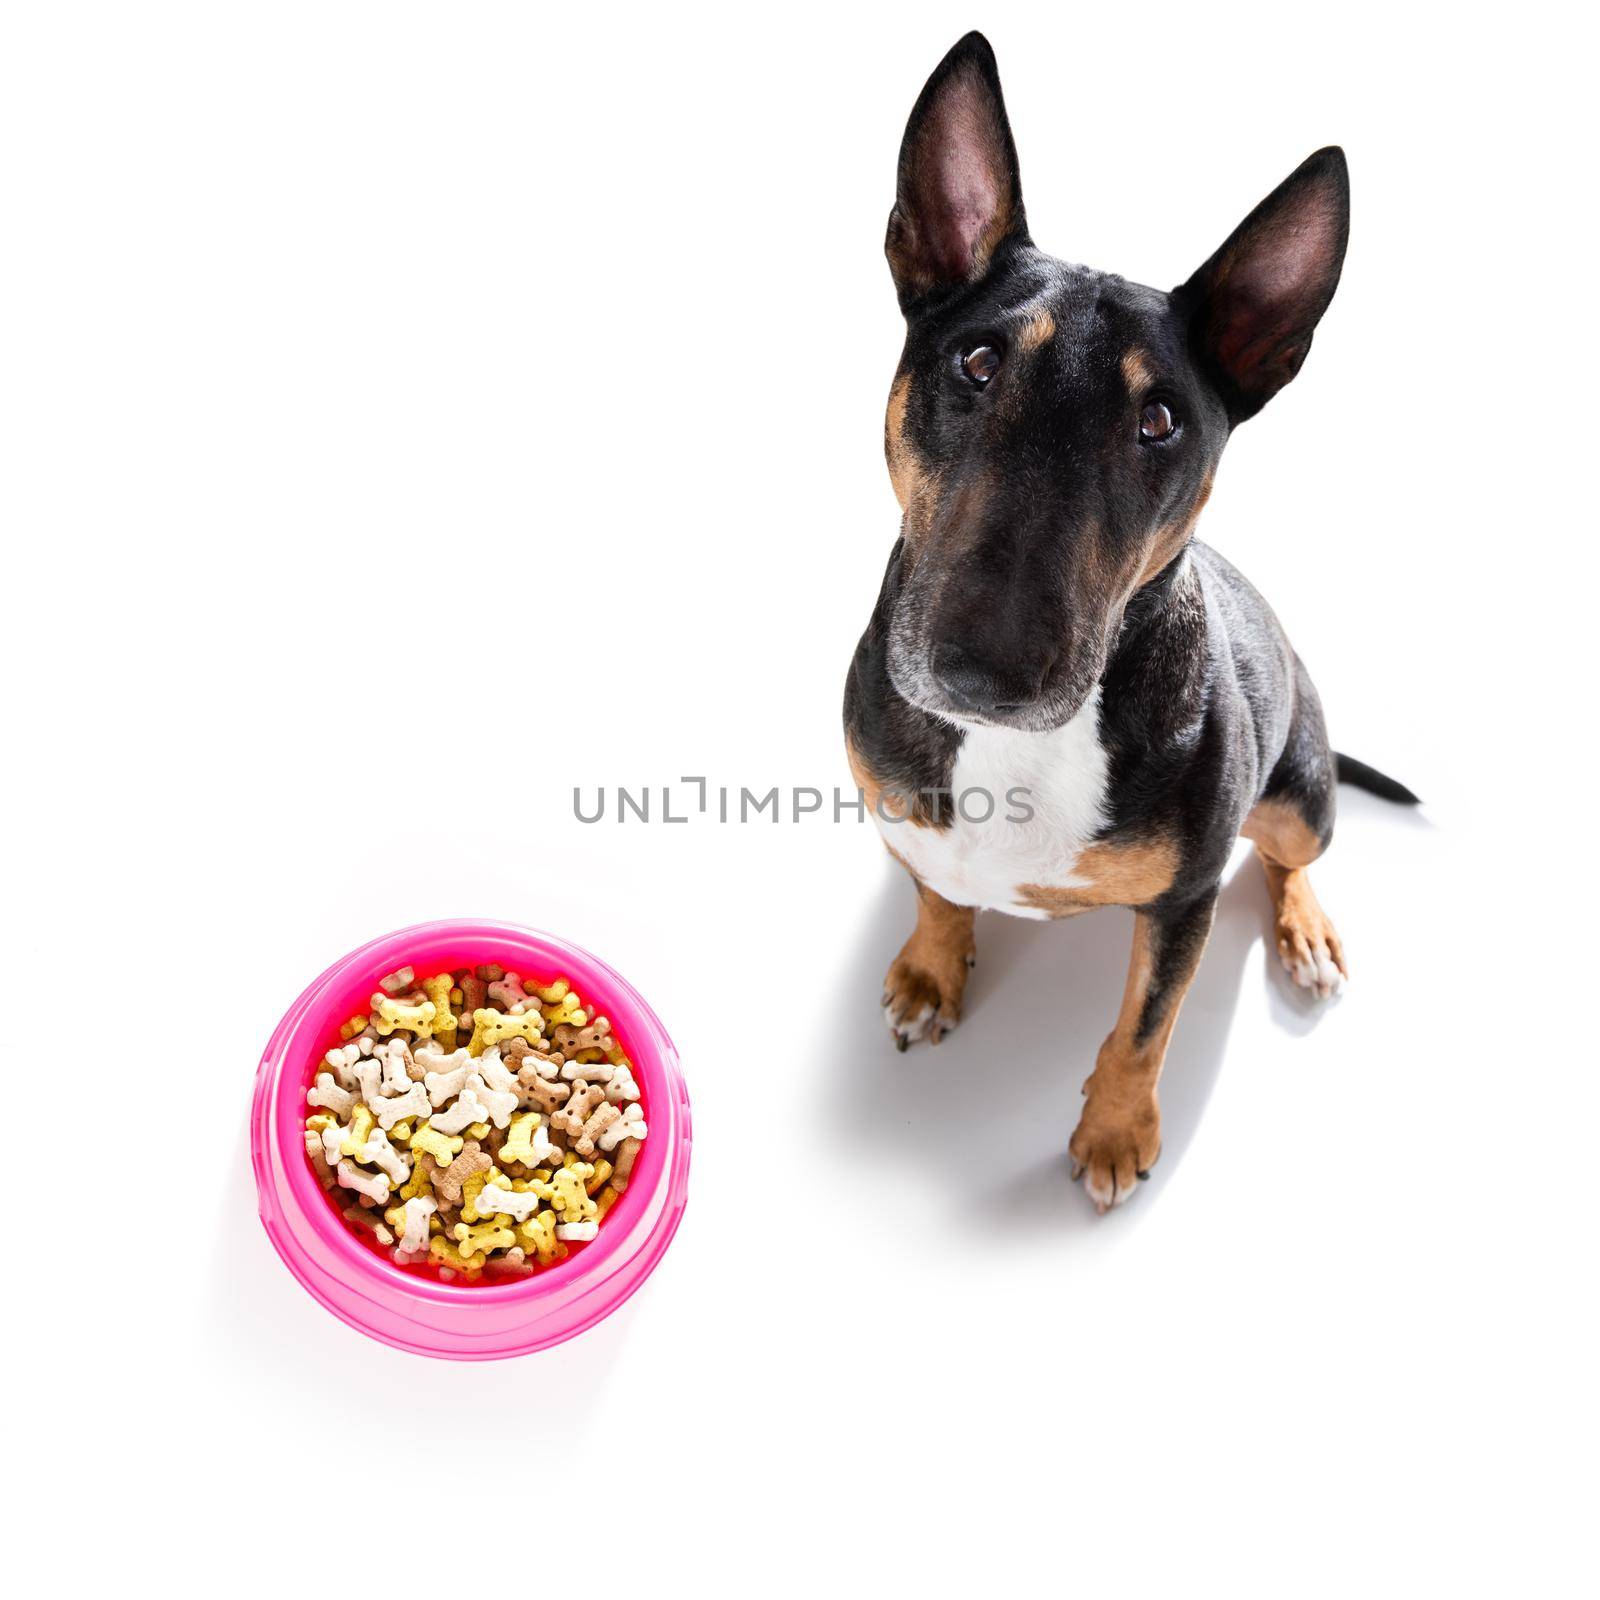 hungry dog with food bowl by Brosch